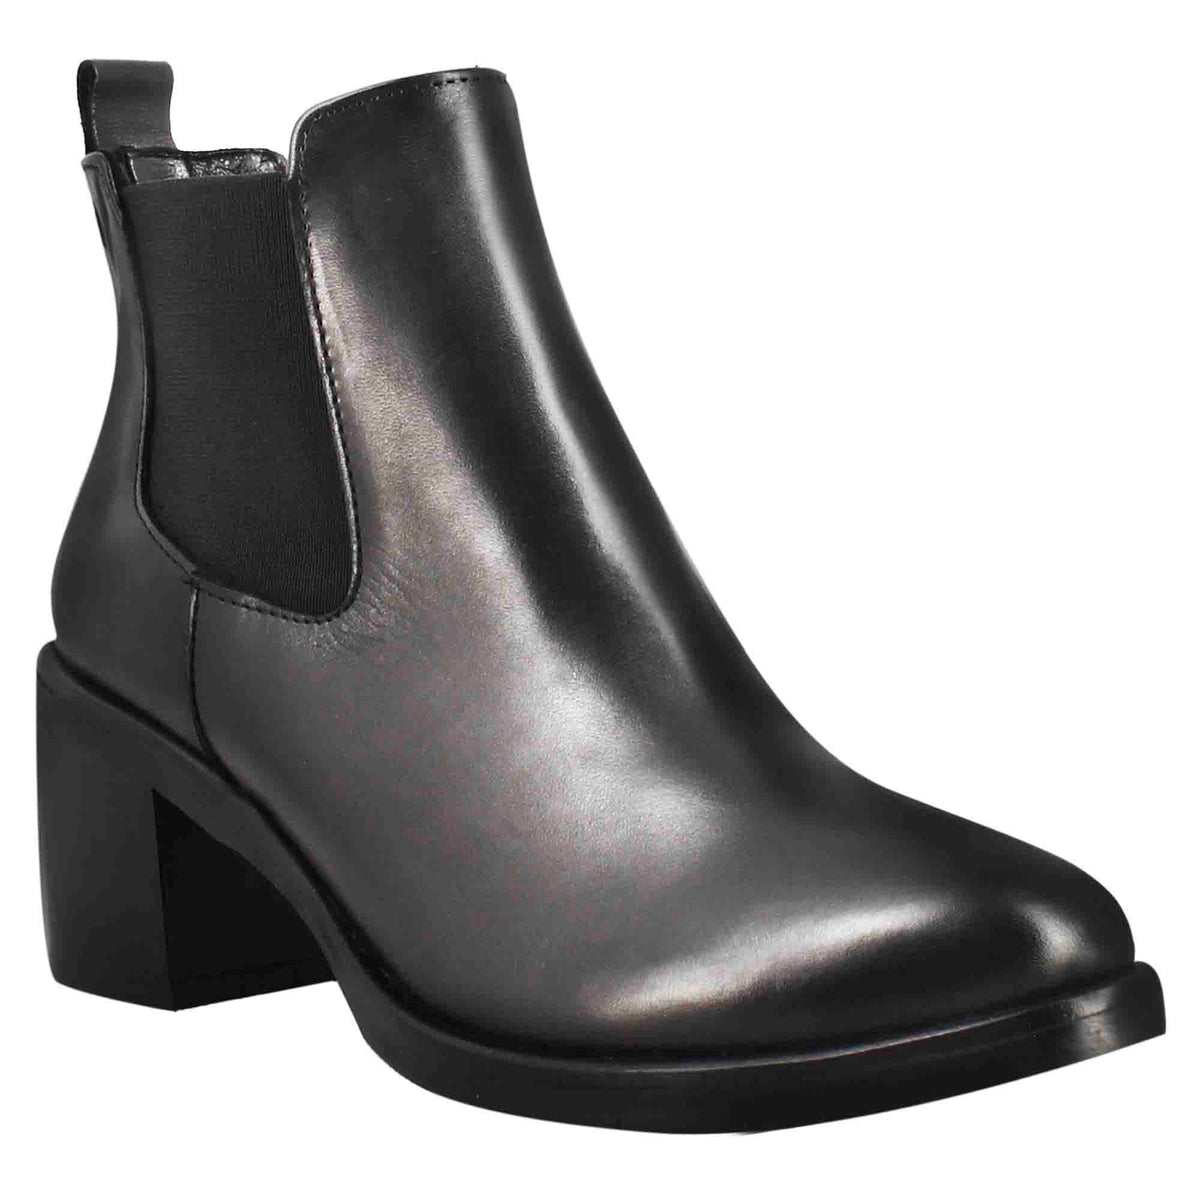 Women's smooth Chelsea with medium heel in black leather